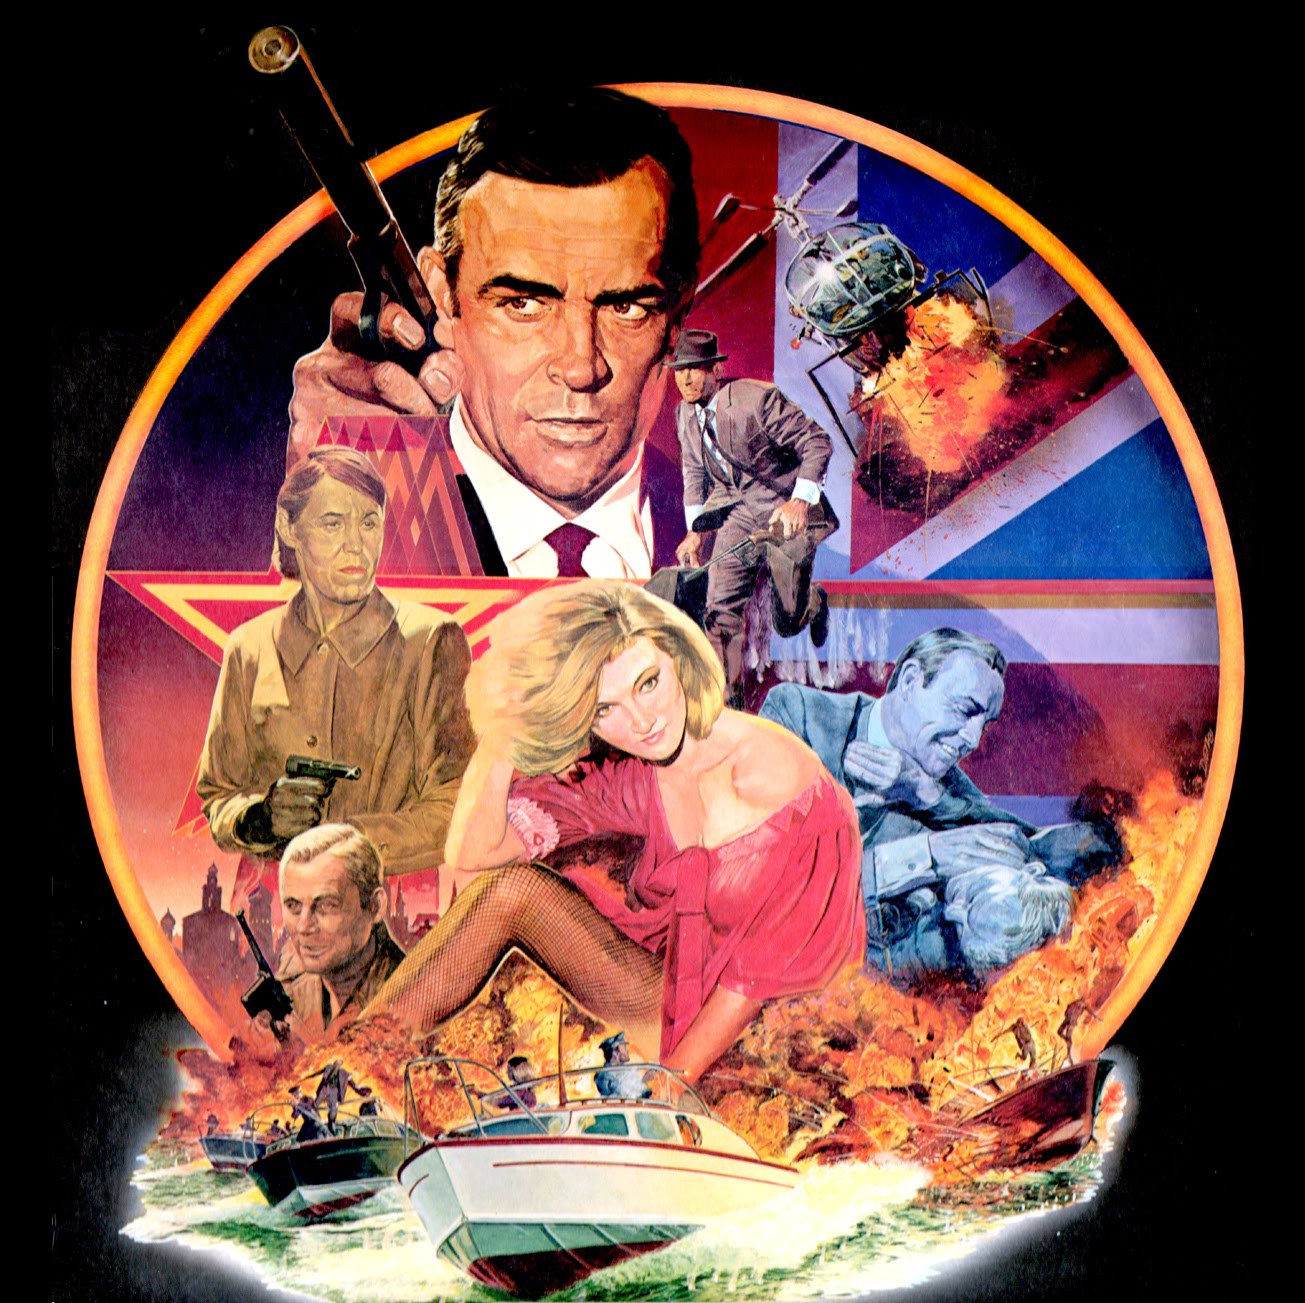 Illustrated 007 - The Art of James Bond: From Russia With Love ...